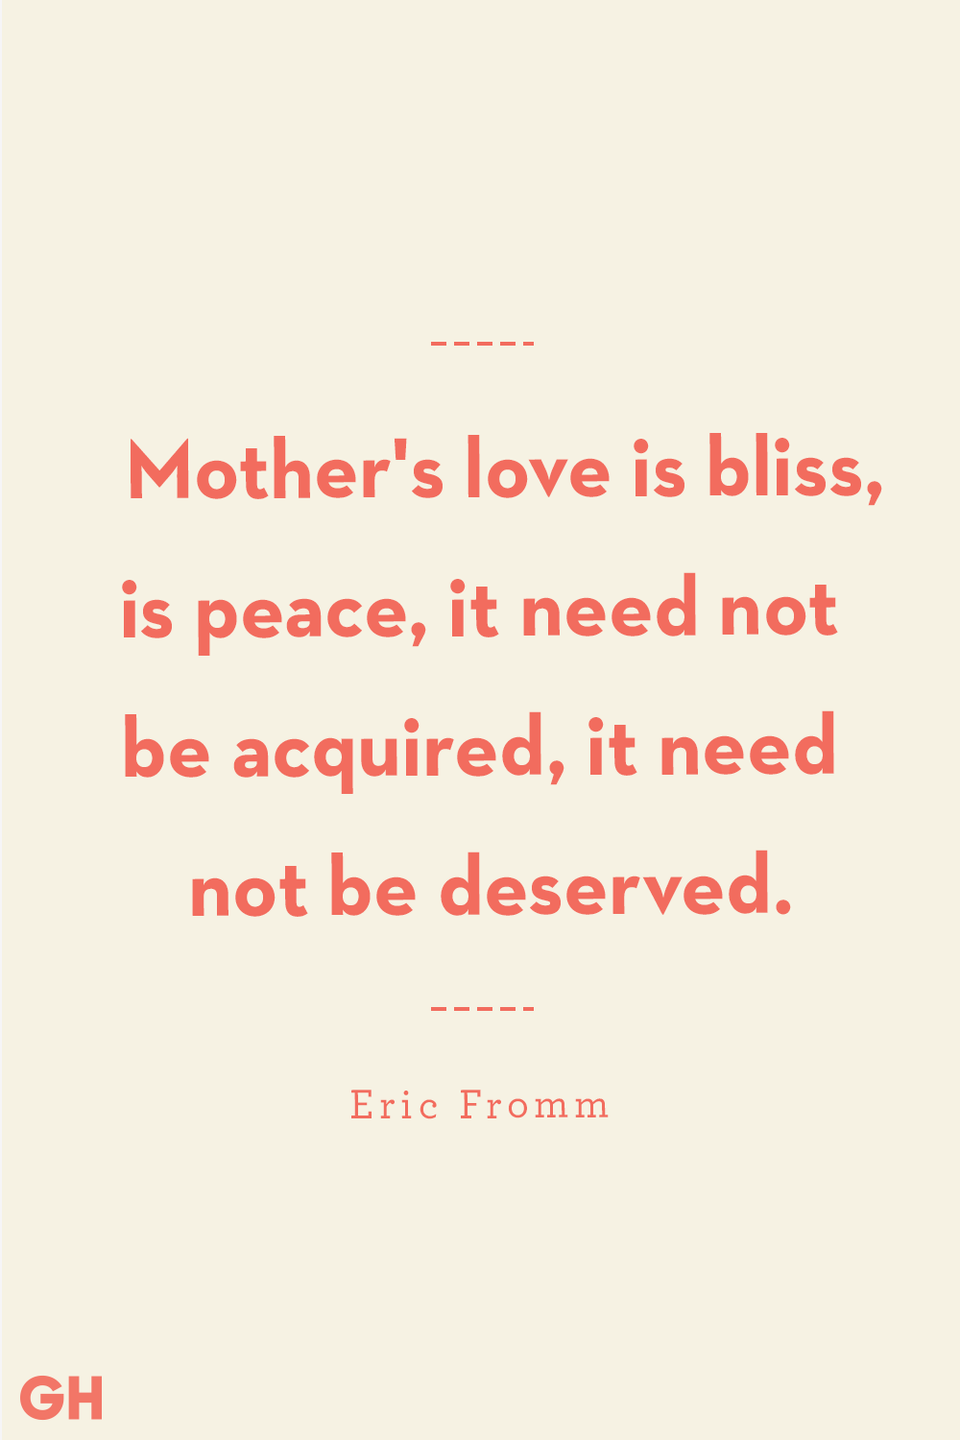 <p>Mother's love is bliss, is peace, it need not be acquired, it need not be deserved.</p>